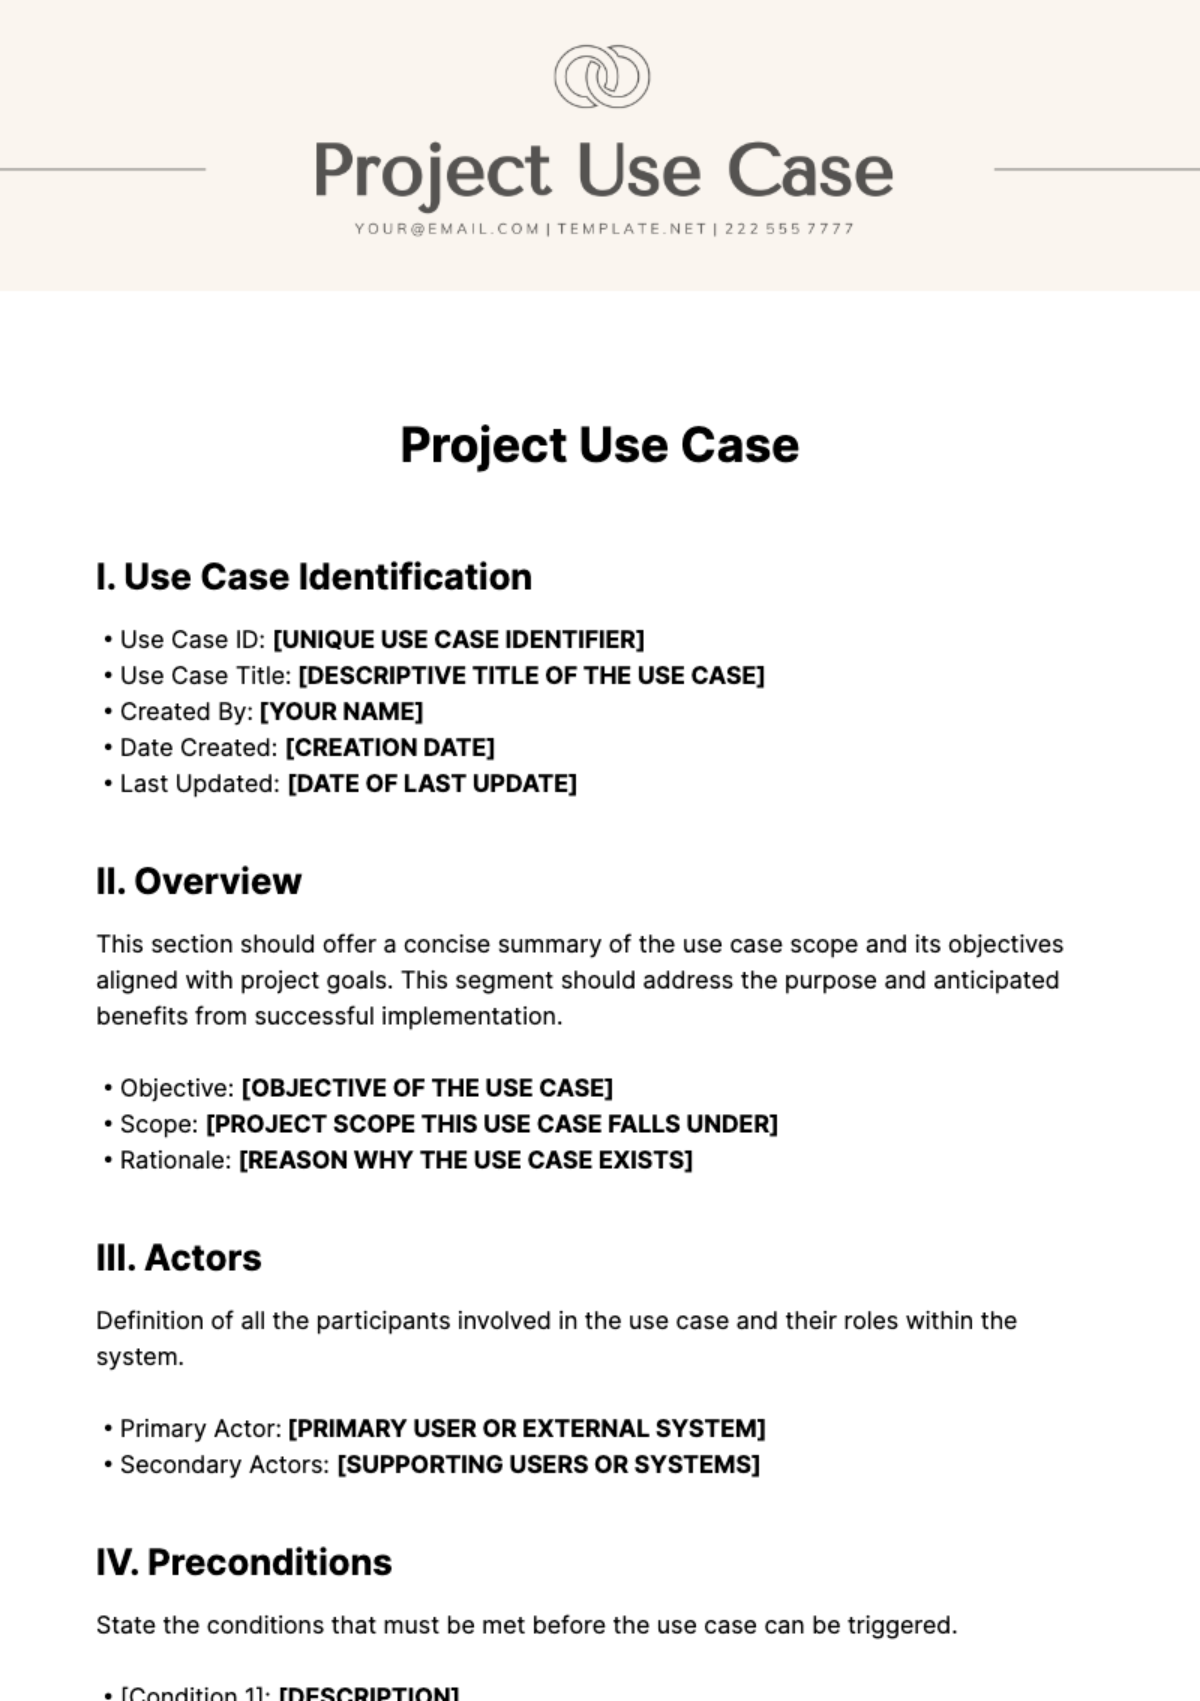 Project Use Case Template